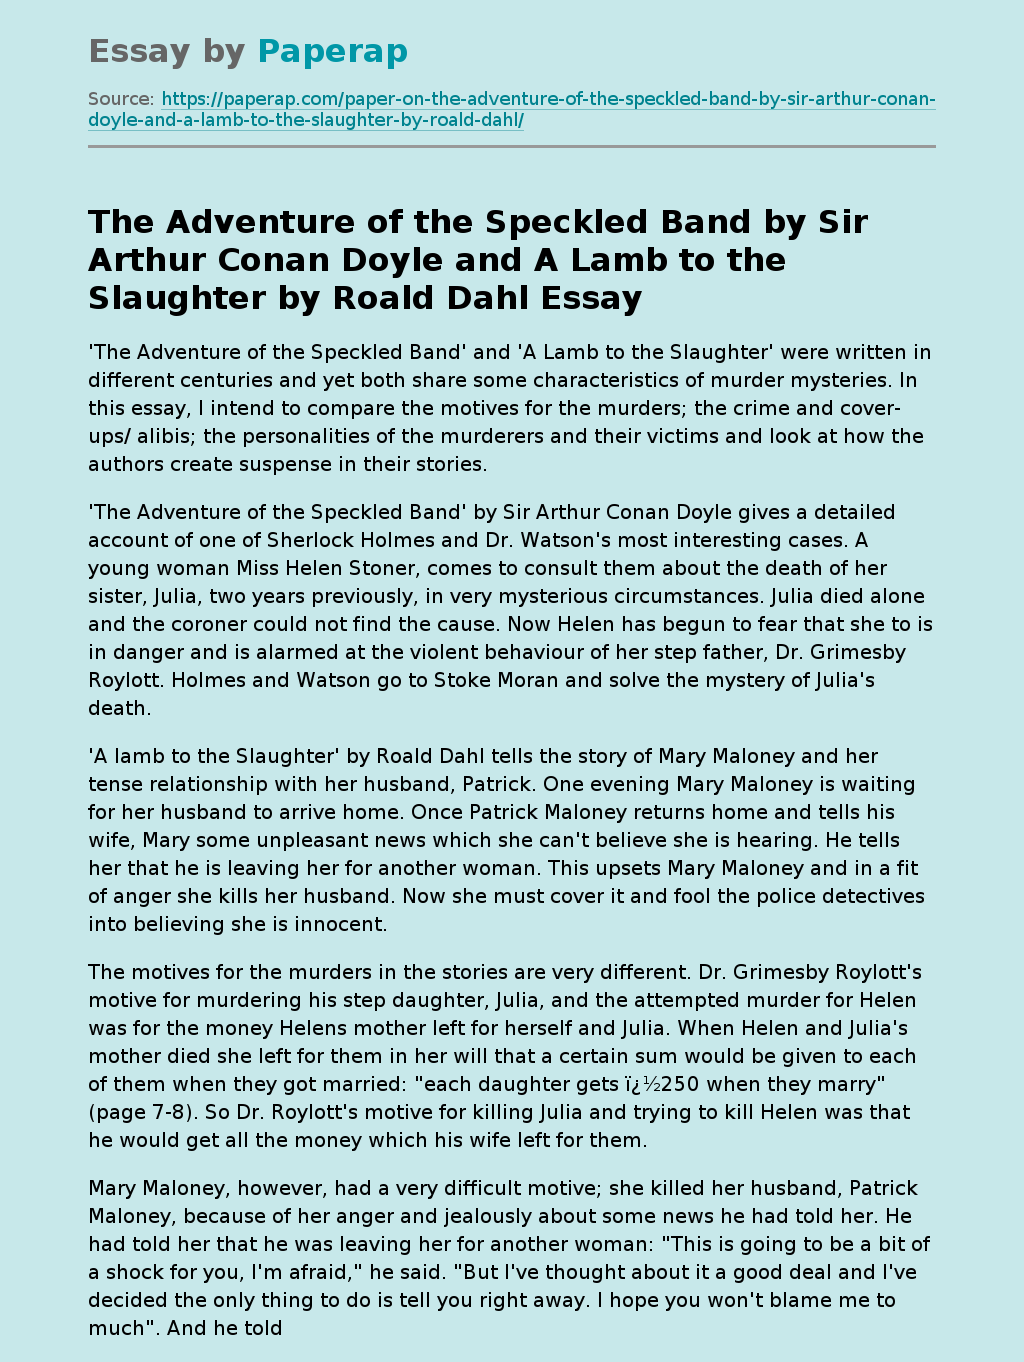 The Adventure of the Speckled Band by Sir Arthur Conan Doyle and A Lamb to the Slaughter by Roald Dahl